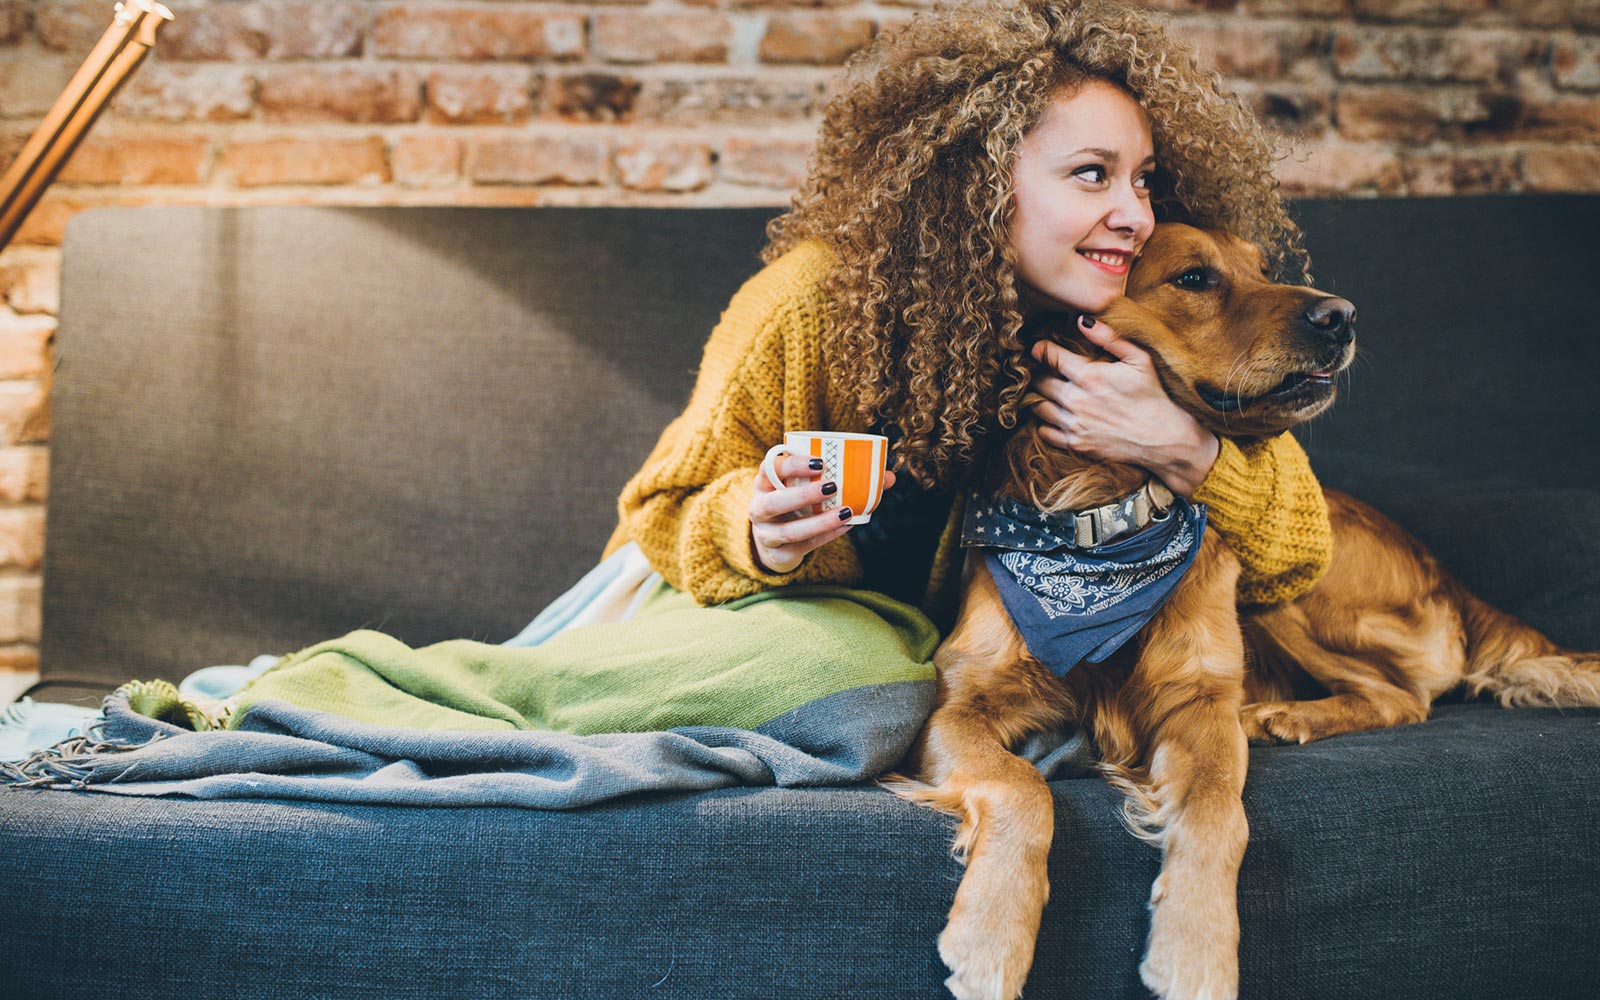 Woman cuddling dog on couch in living room